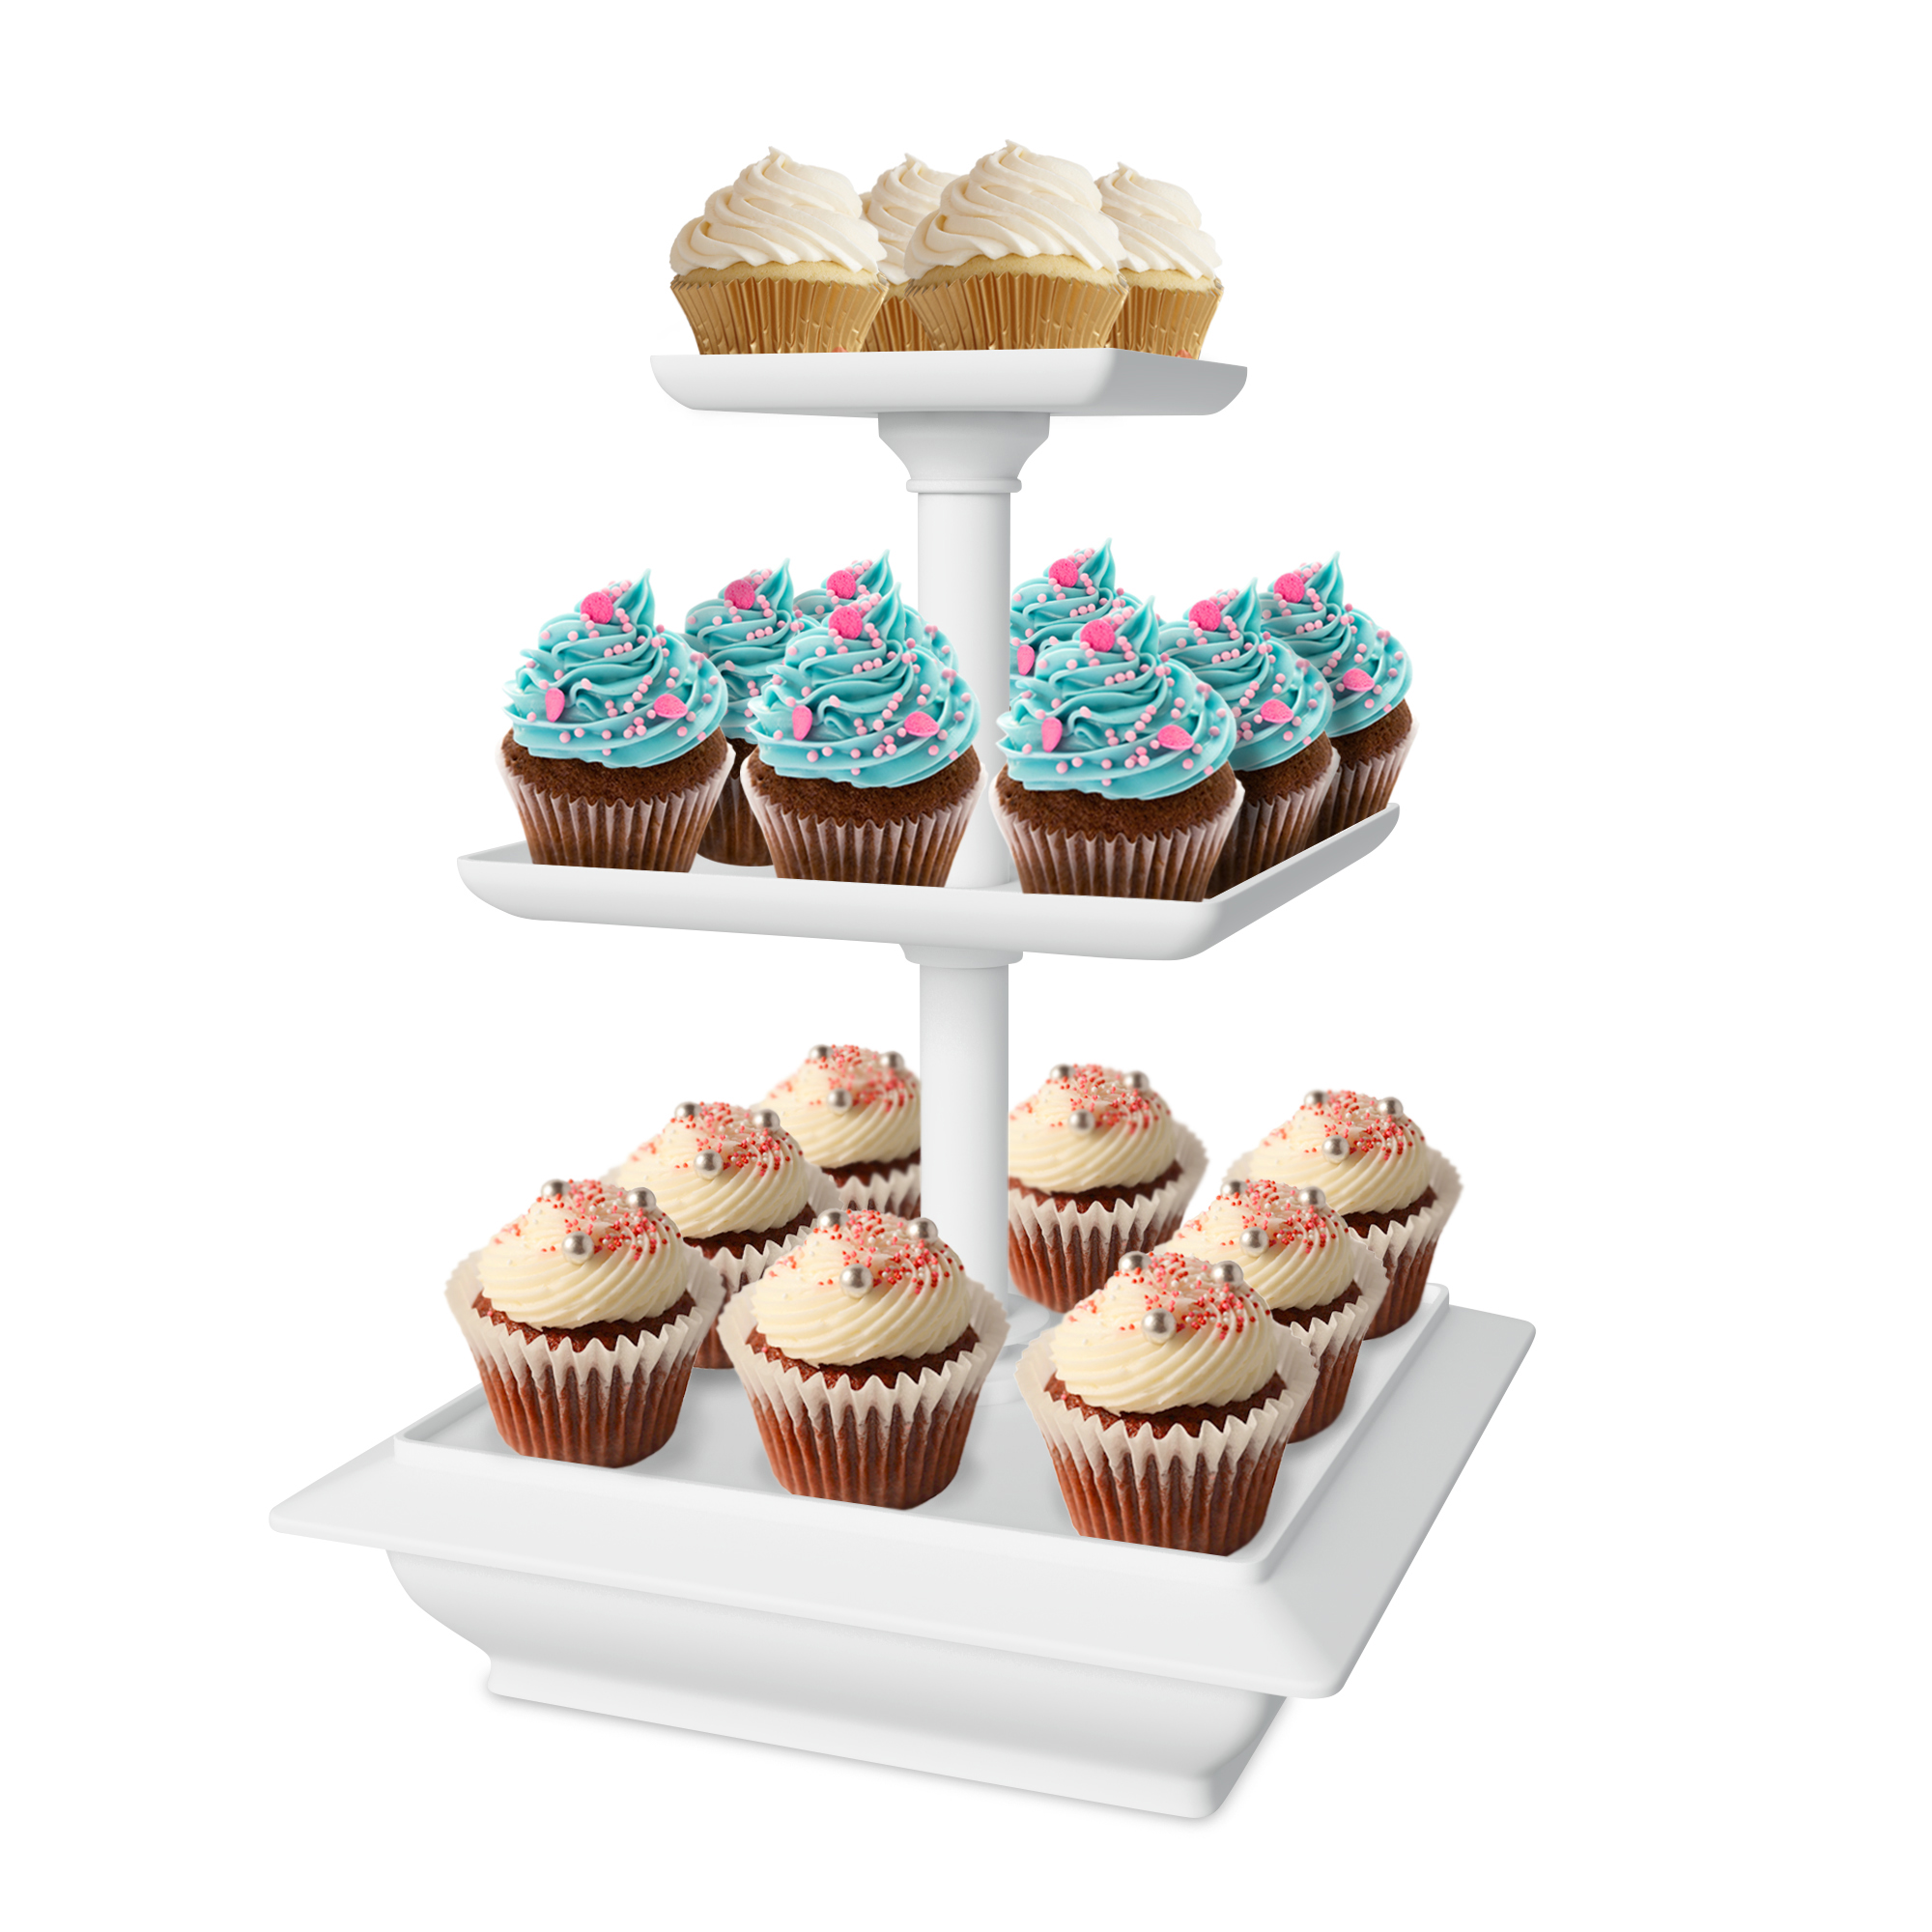 Chef Buddy 8 in x 8 in Plastic 3-Tier Birthday Tiered Dessert Stand, White - image 1 of 8